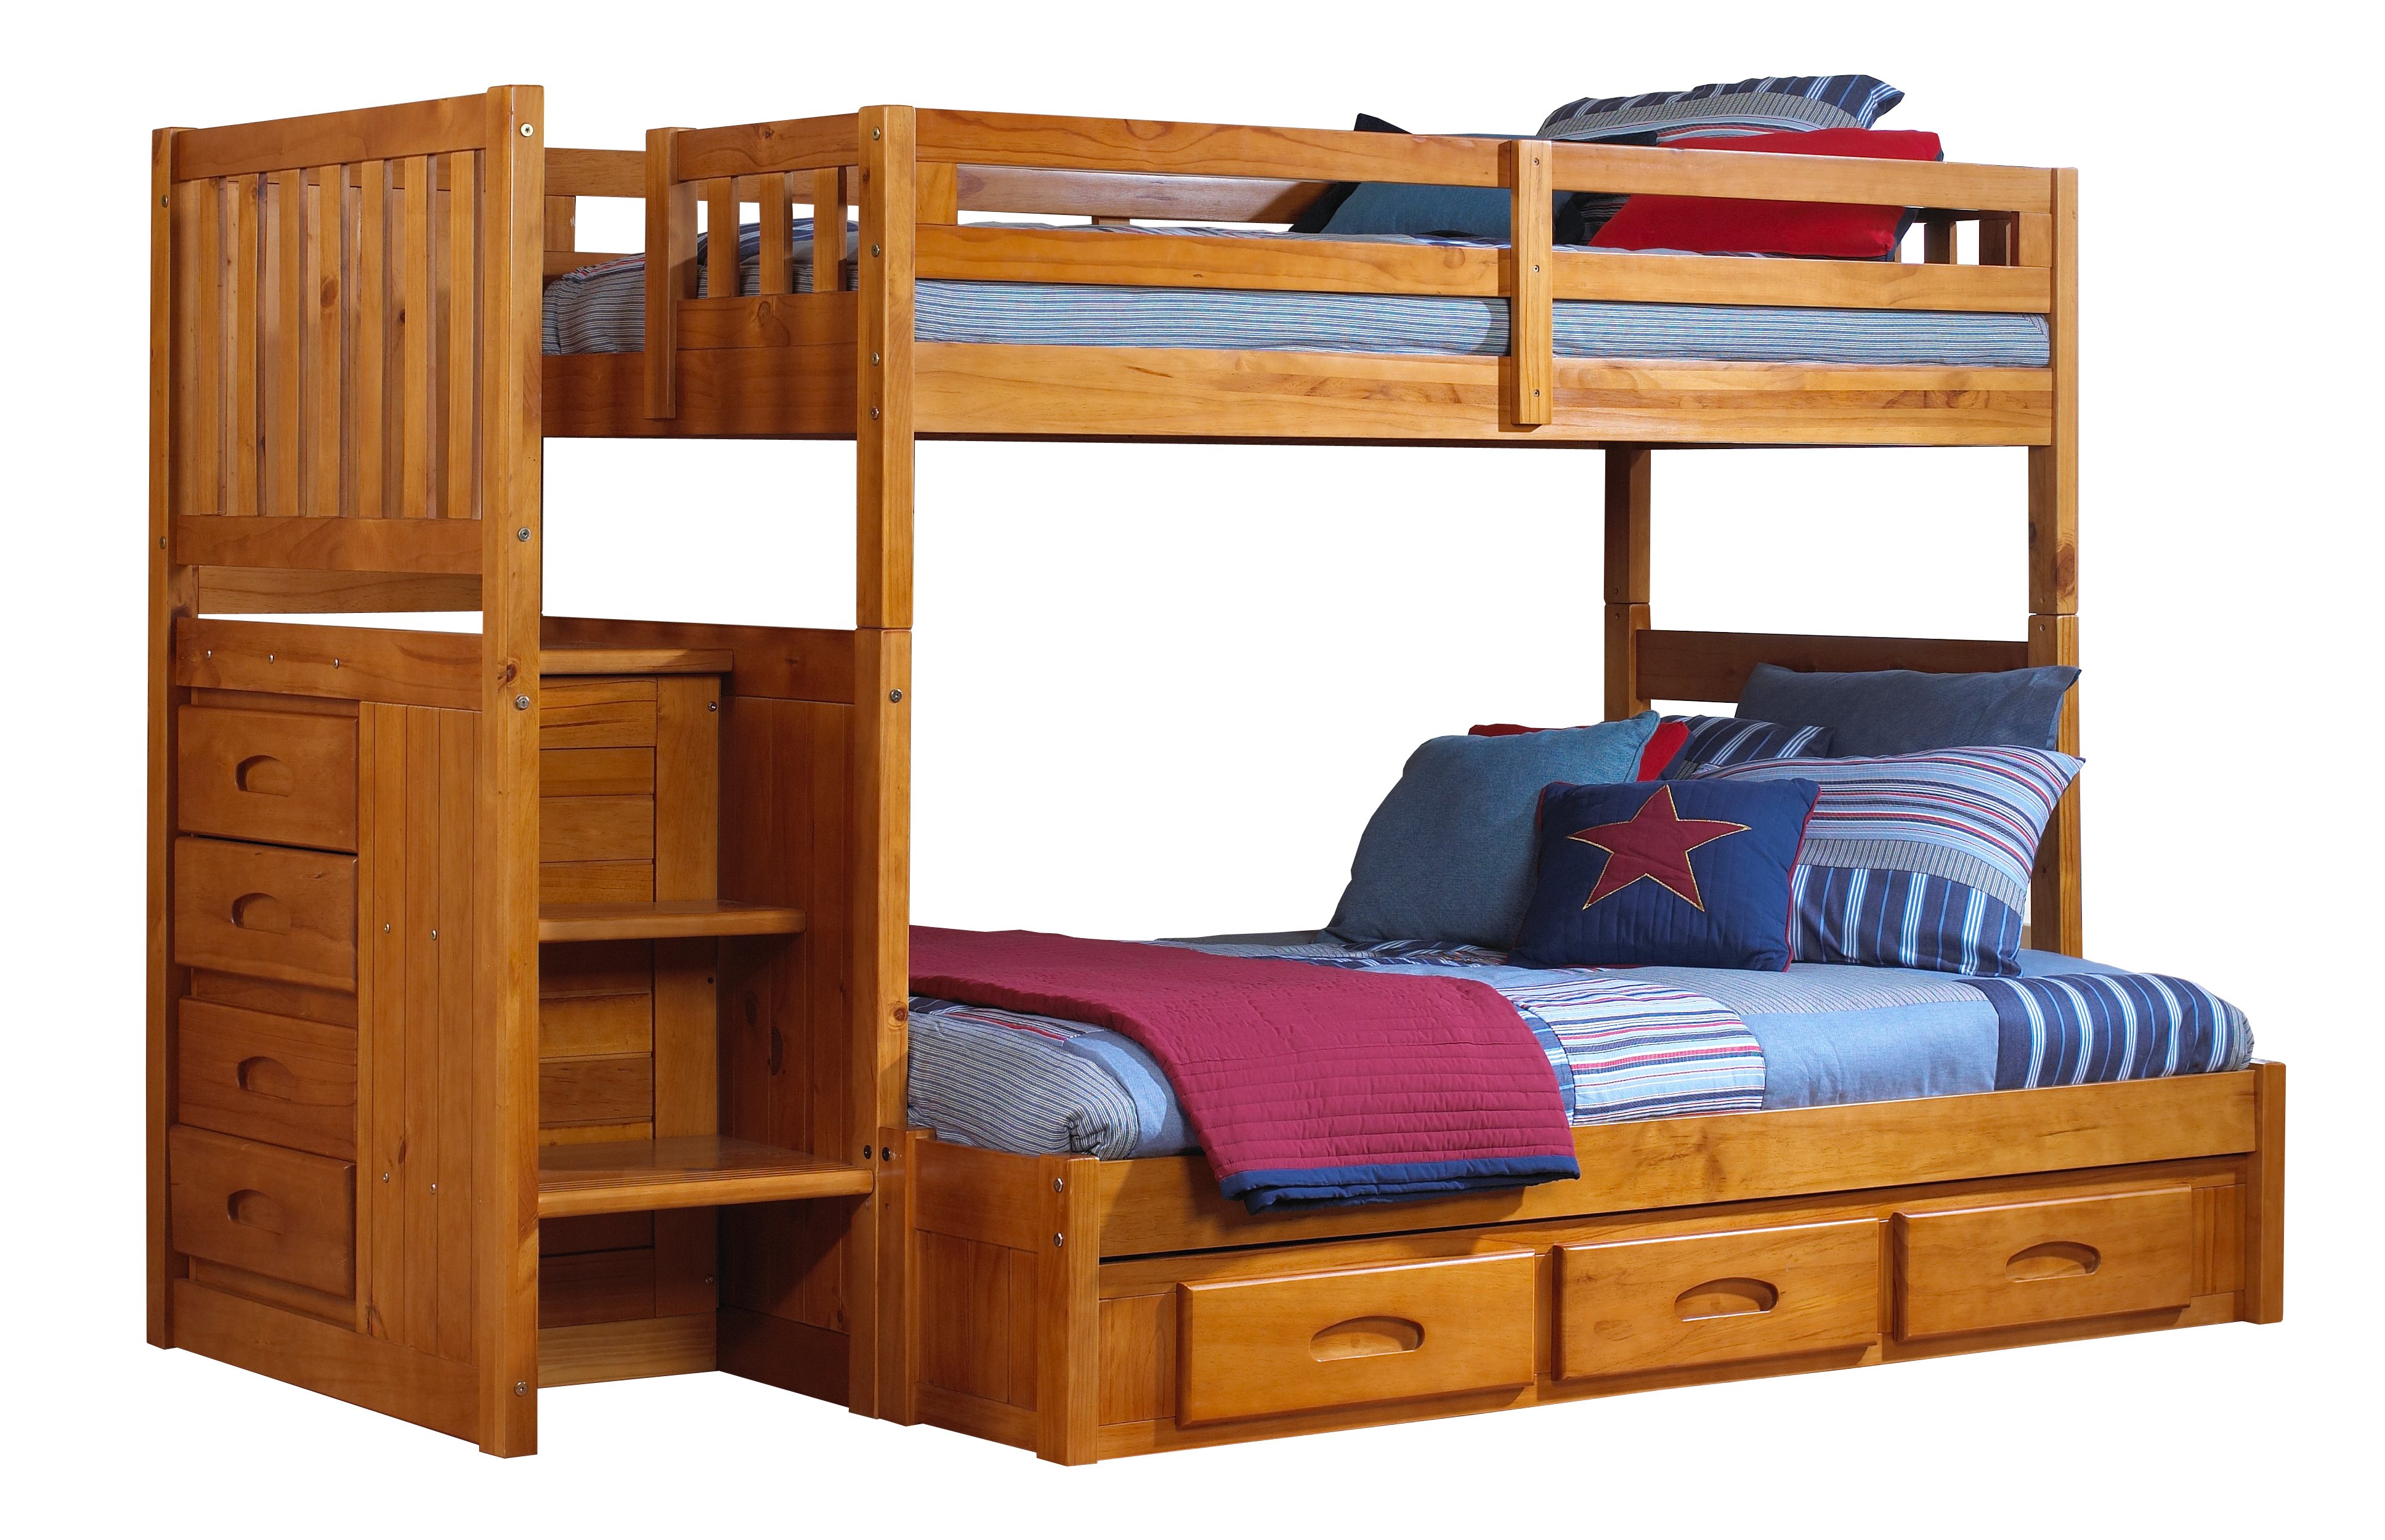 Honey Staircase Bunk Bed, Mission Twin Over Full Bunk Bed With Drawers